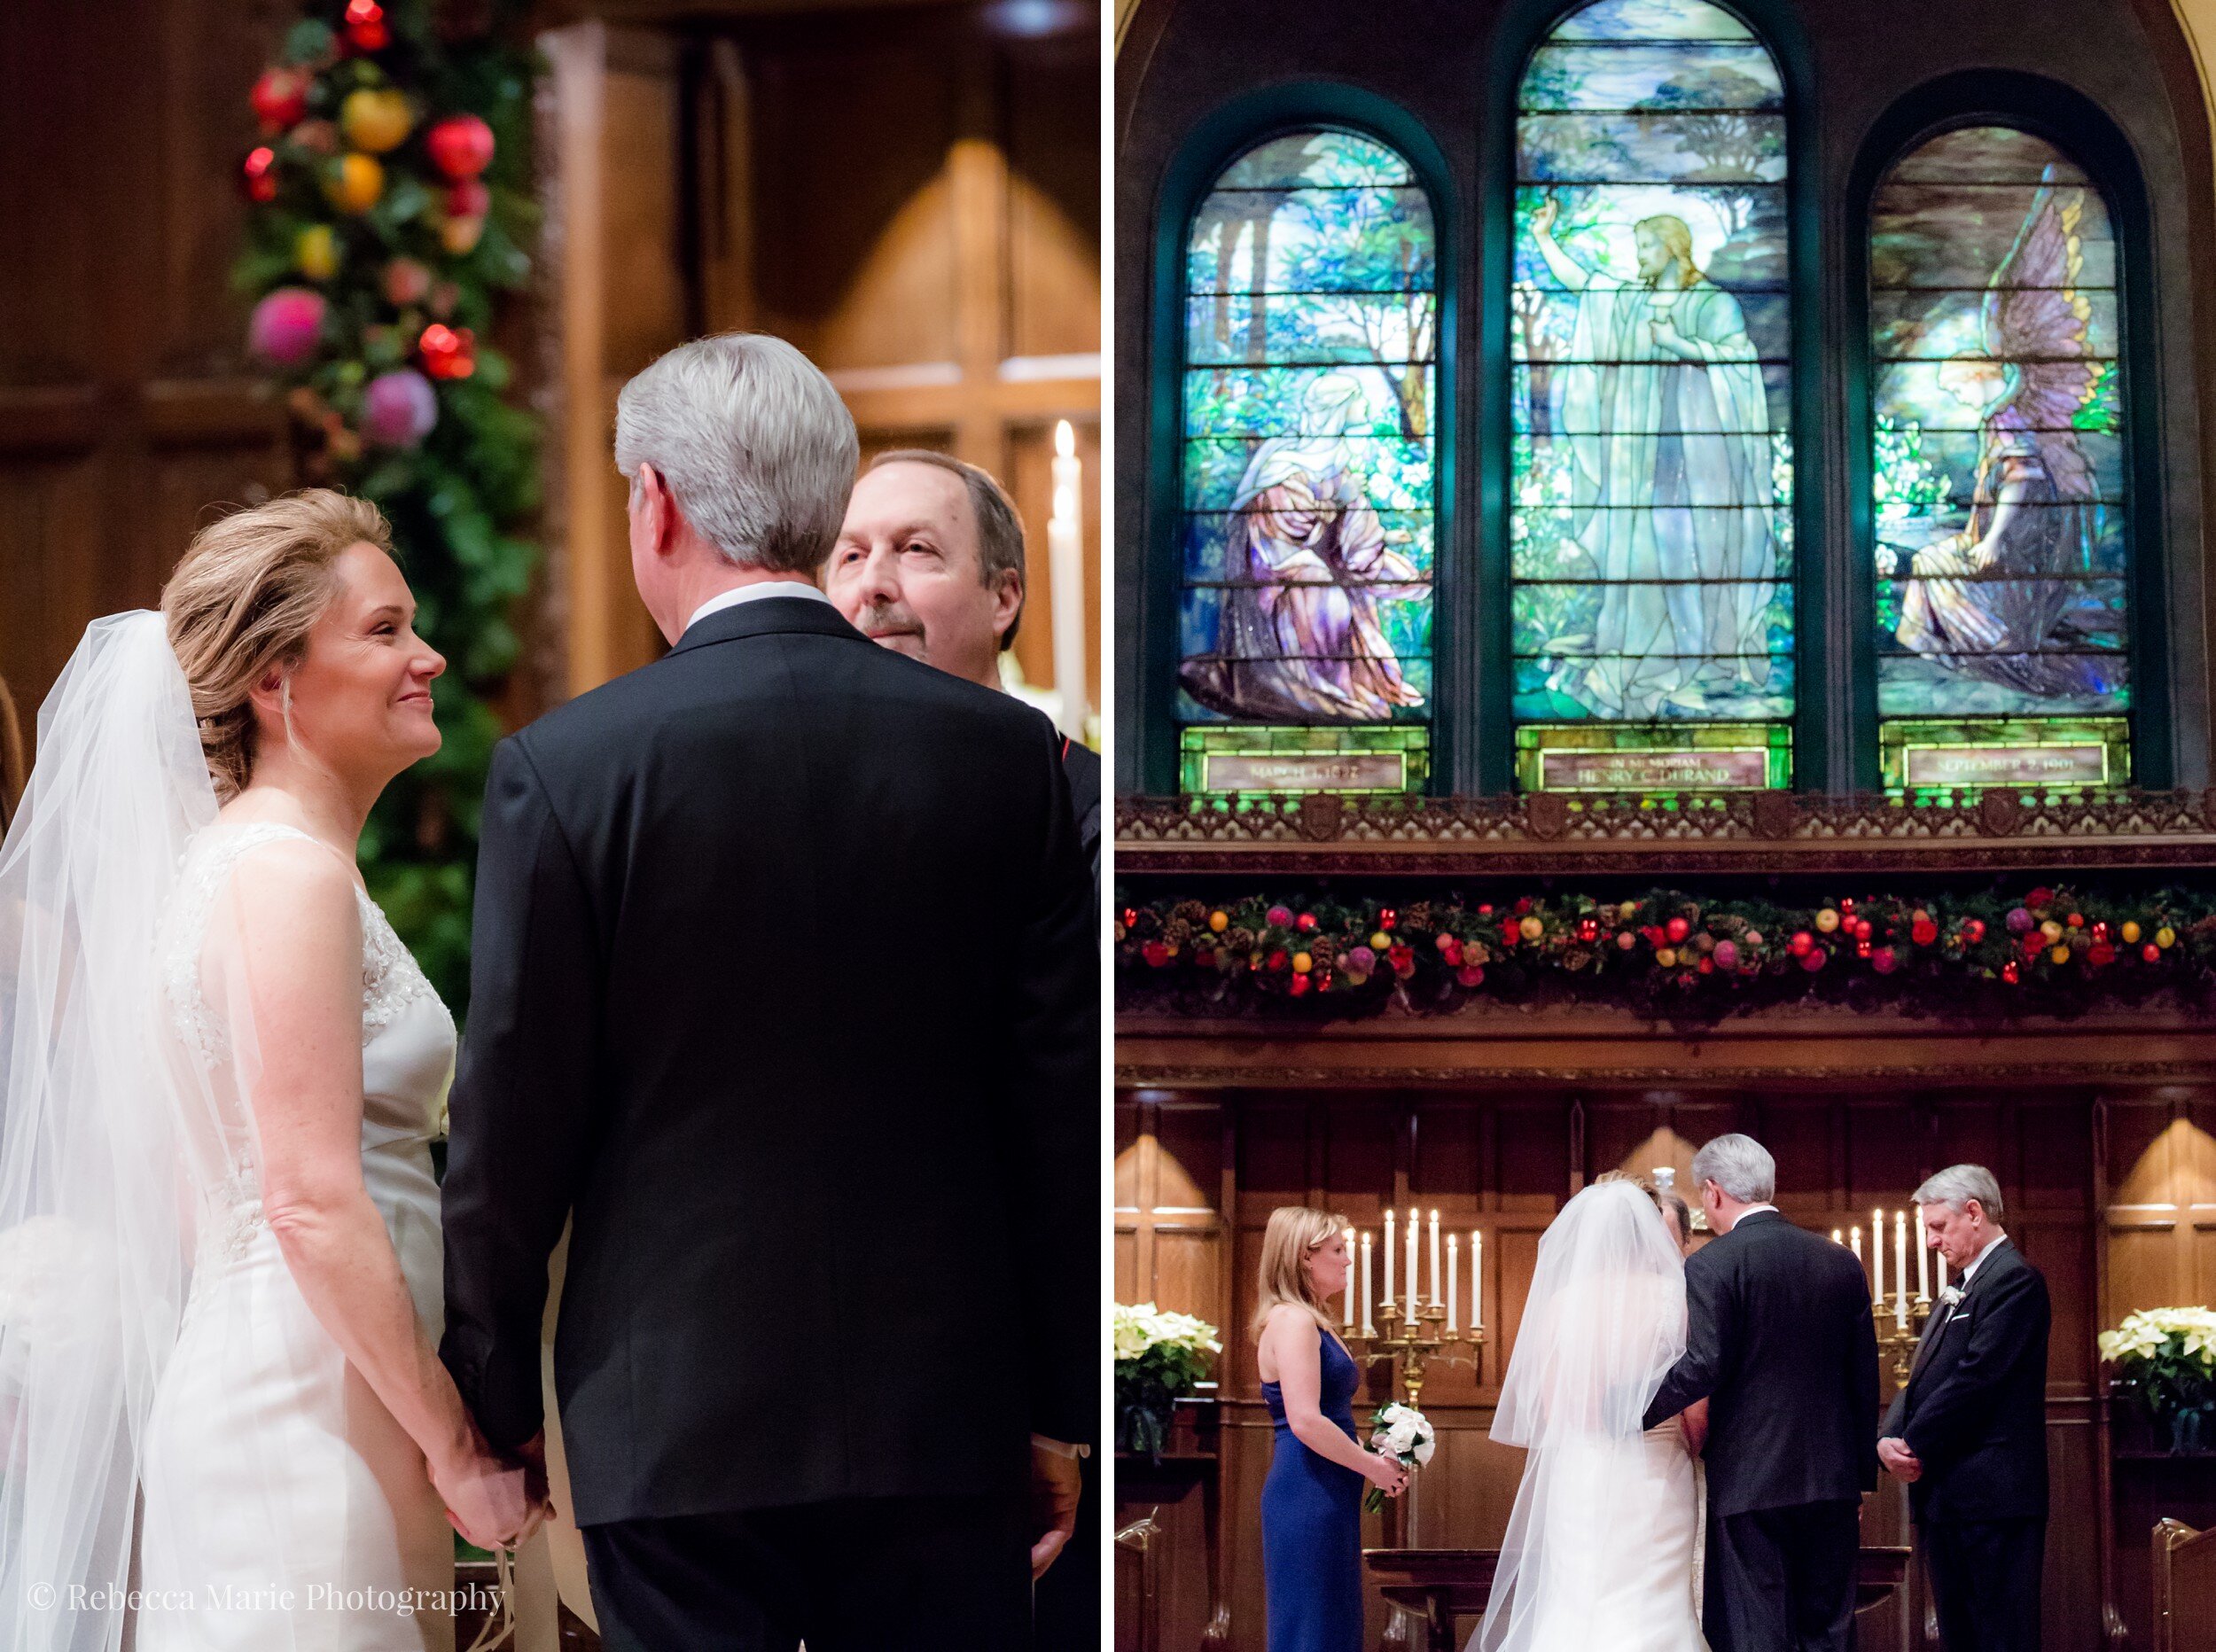 intimate-christmas-wedding-chicago-rebecca-marie-photography_0007